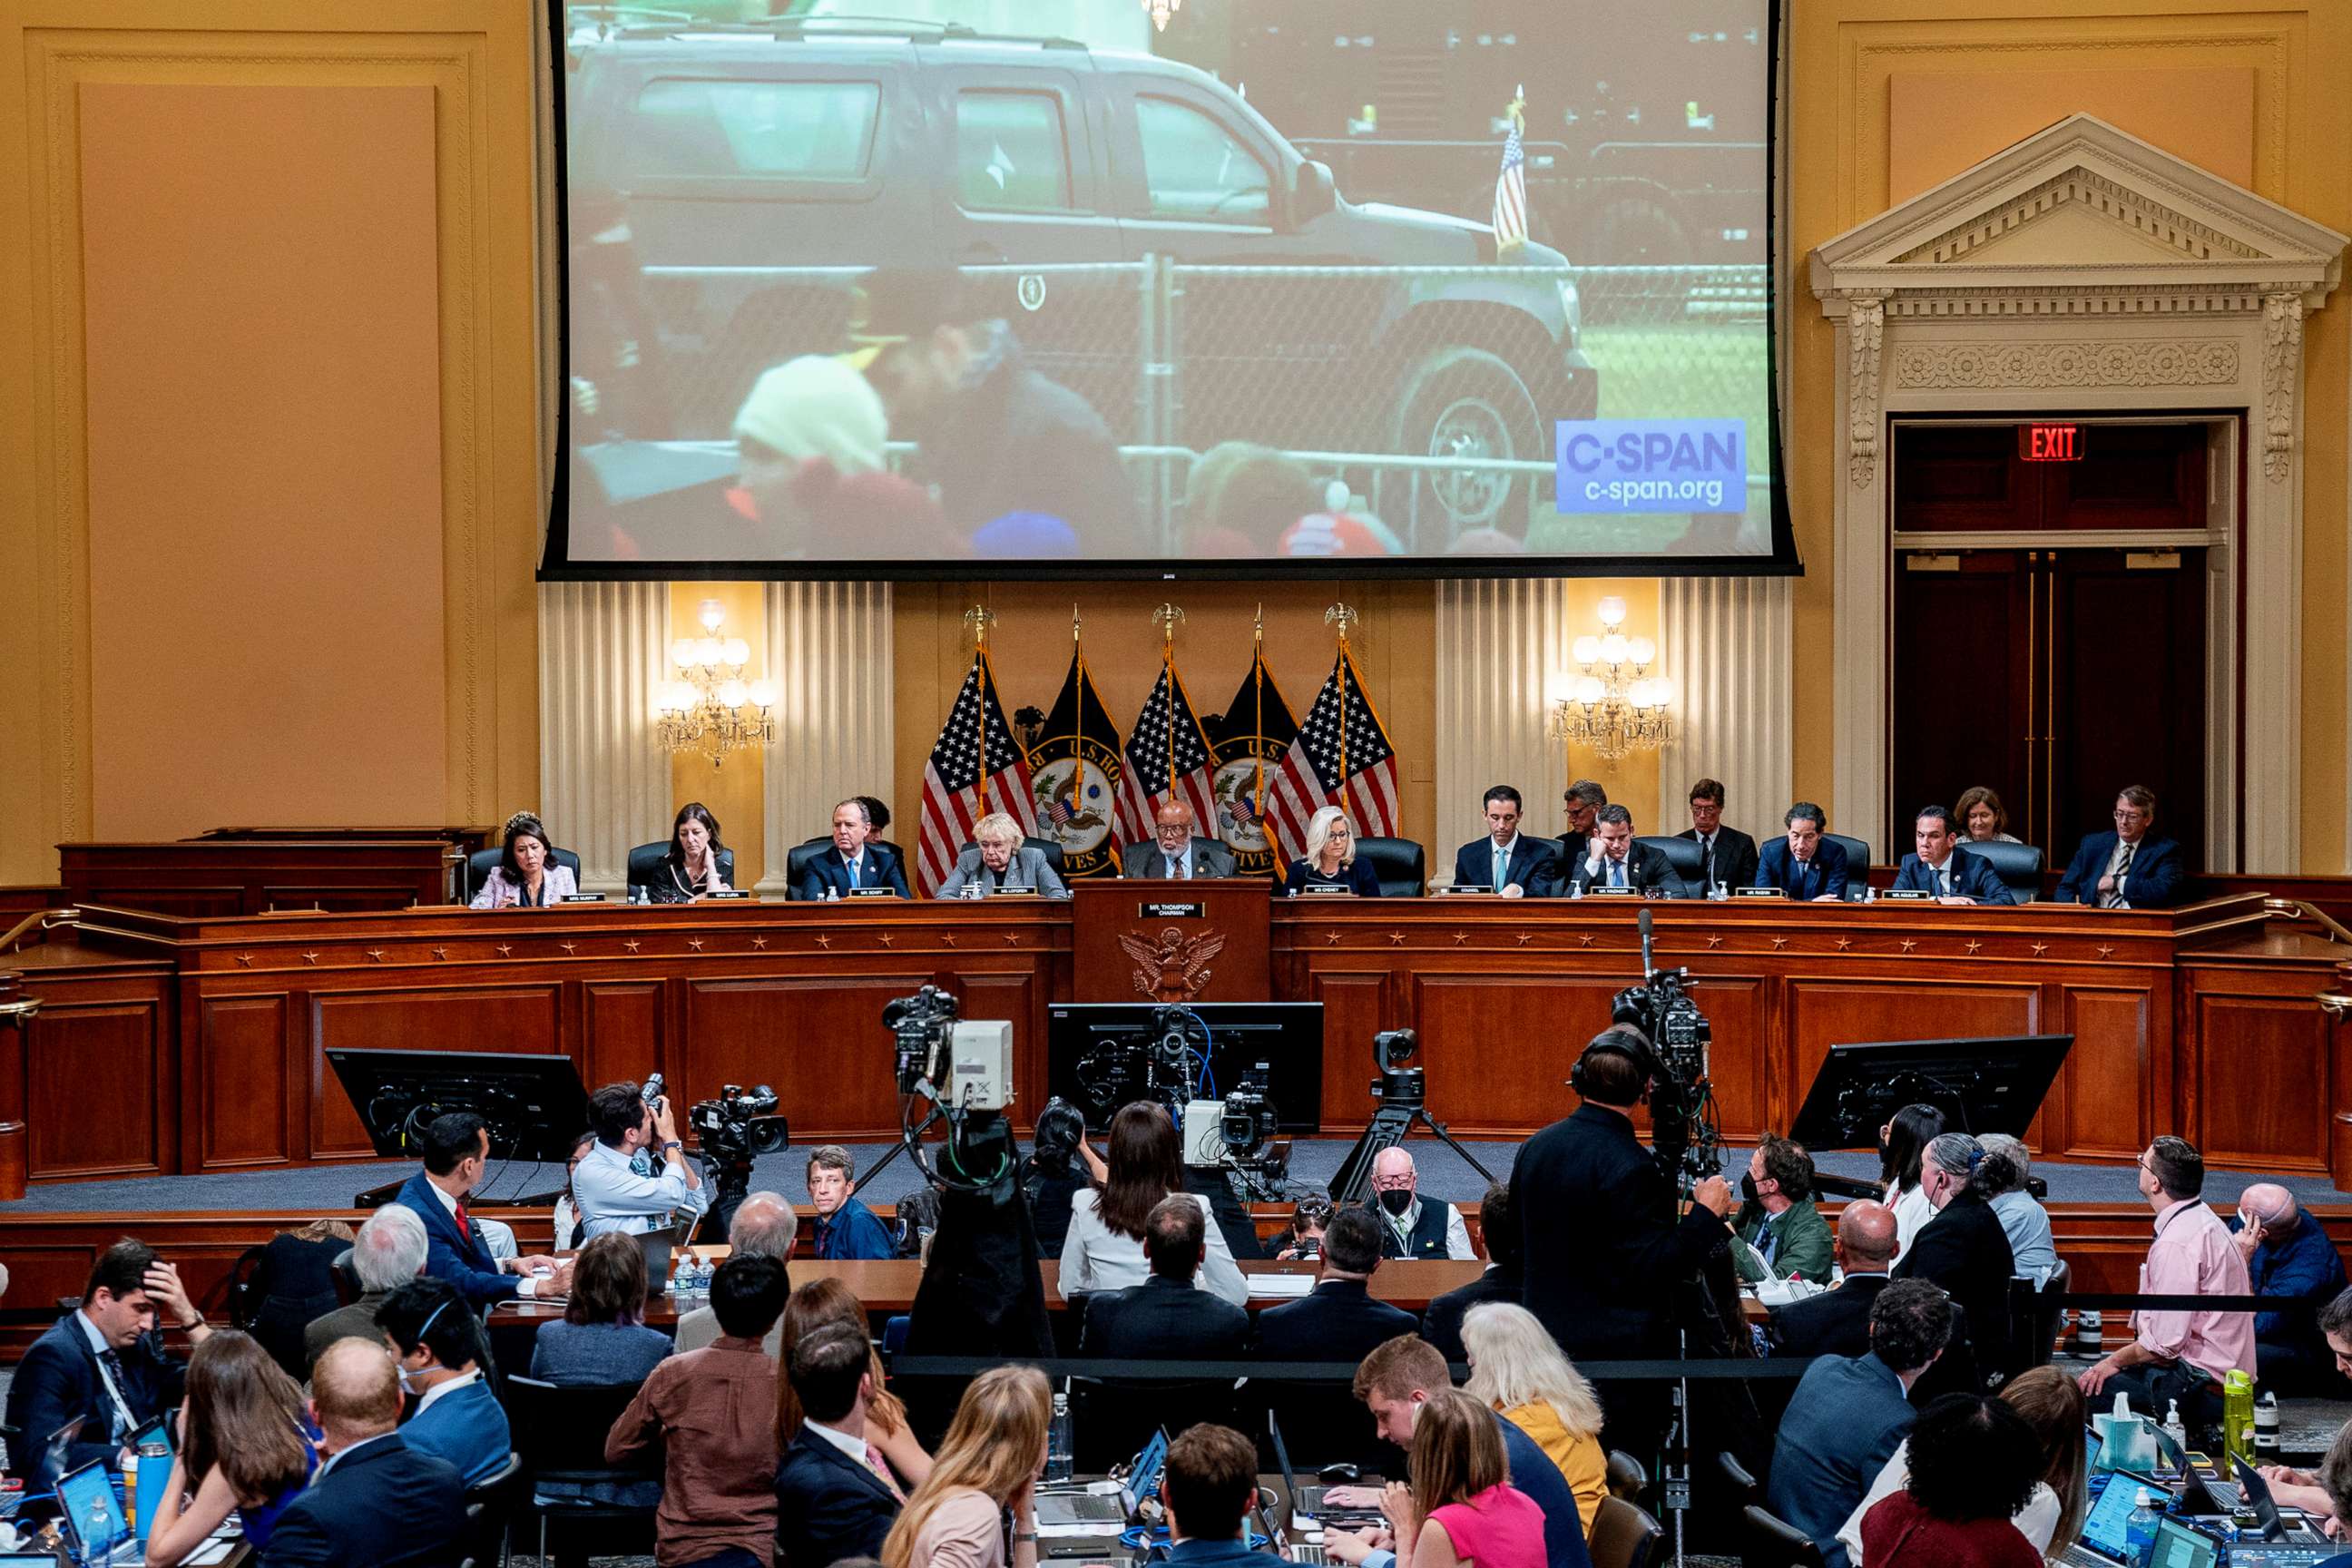 PHOTO: A video of President Trump's motorcade leaving the January 6th rally on the Ellipse is displayed as Cassidy Hutchinson testifies in a public hearing of the House Select Committee investigating the January 6 Attack on Capitol, June 28, 2022.